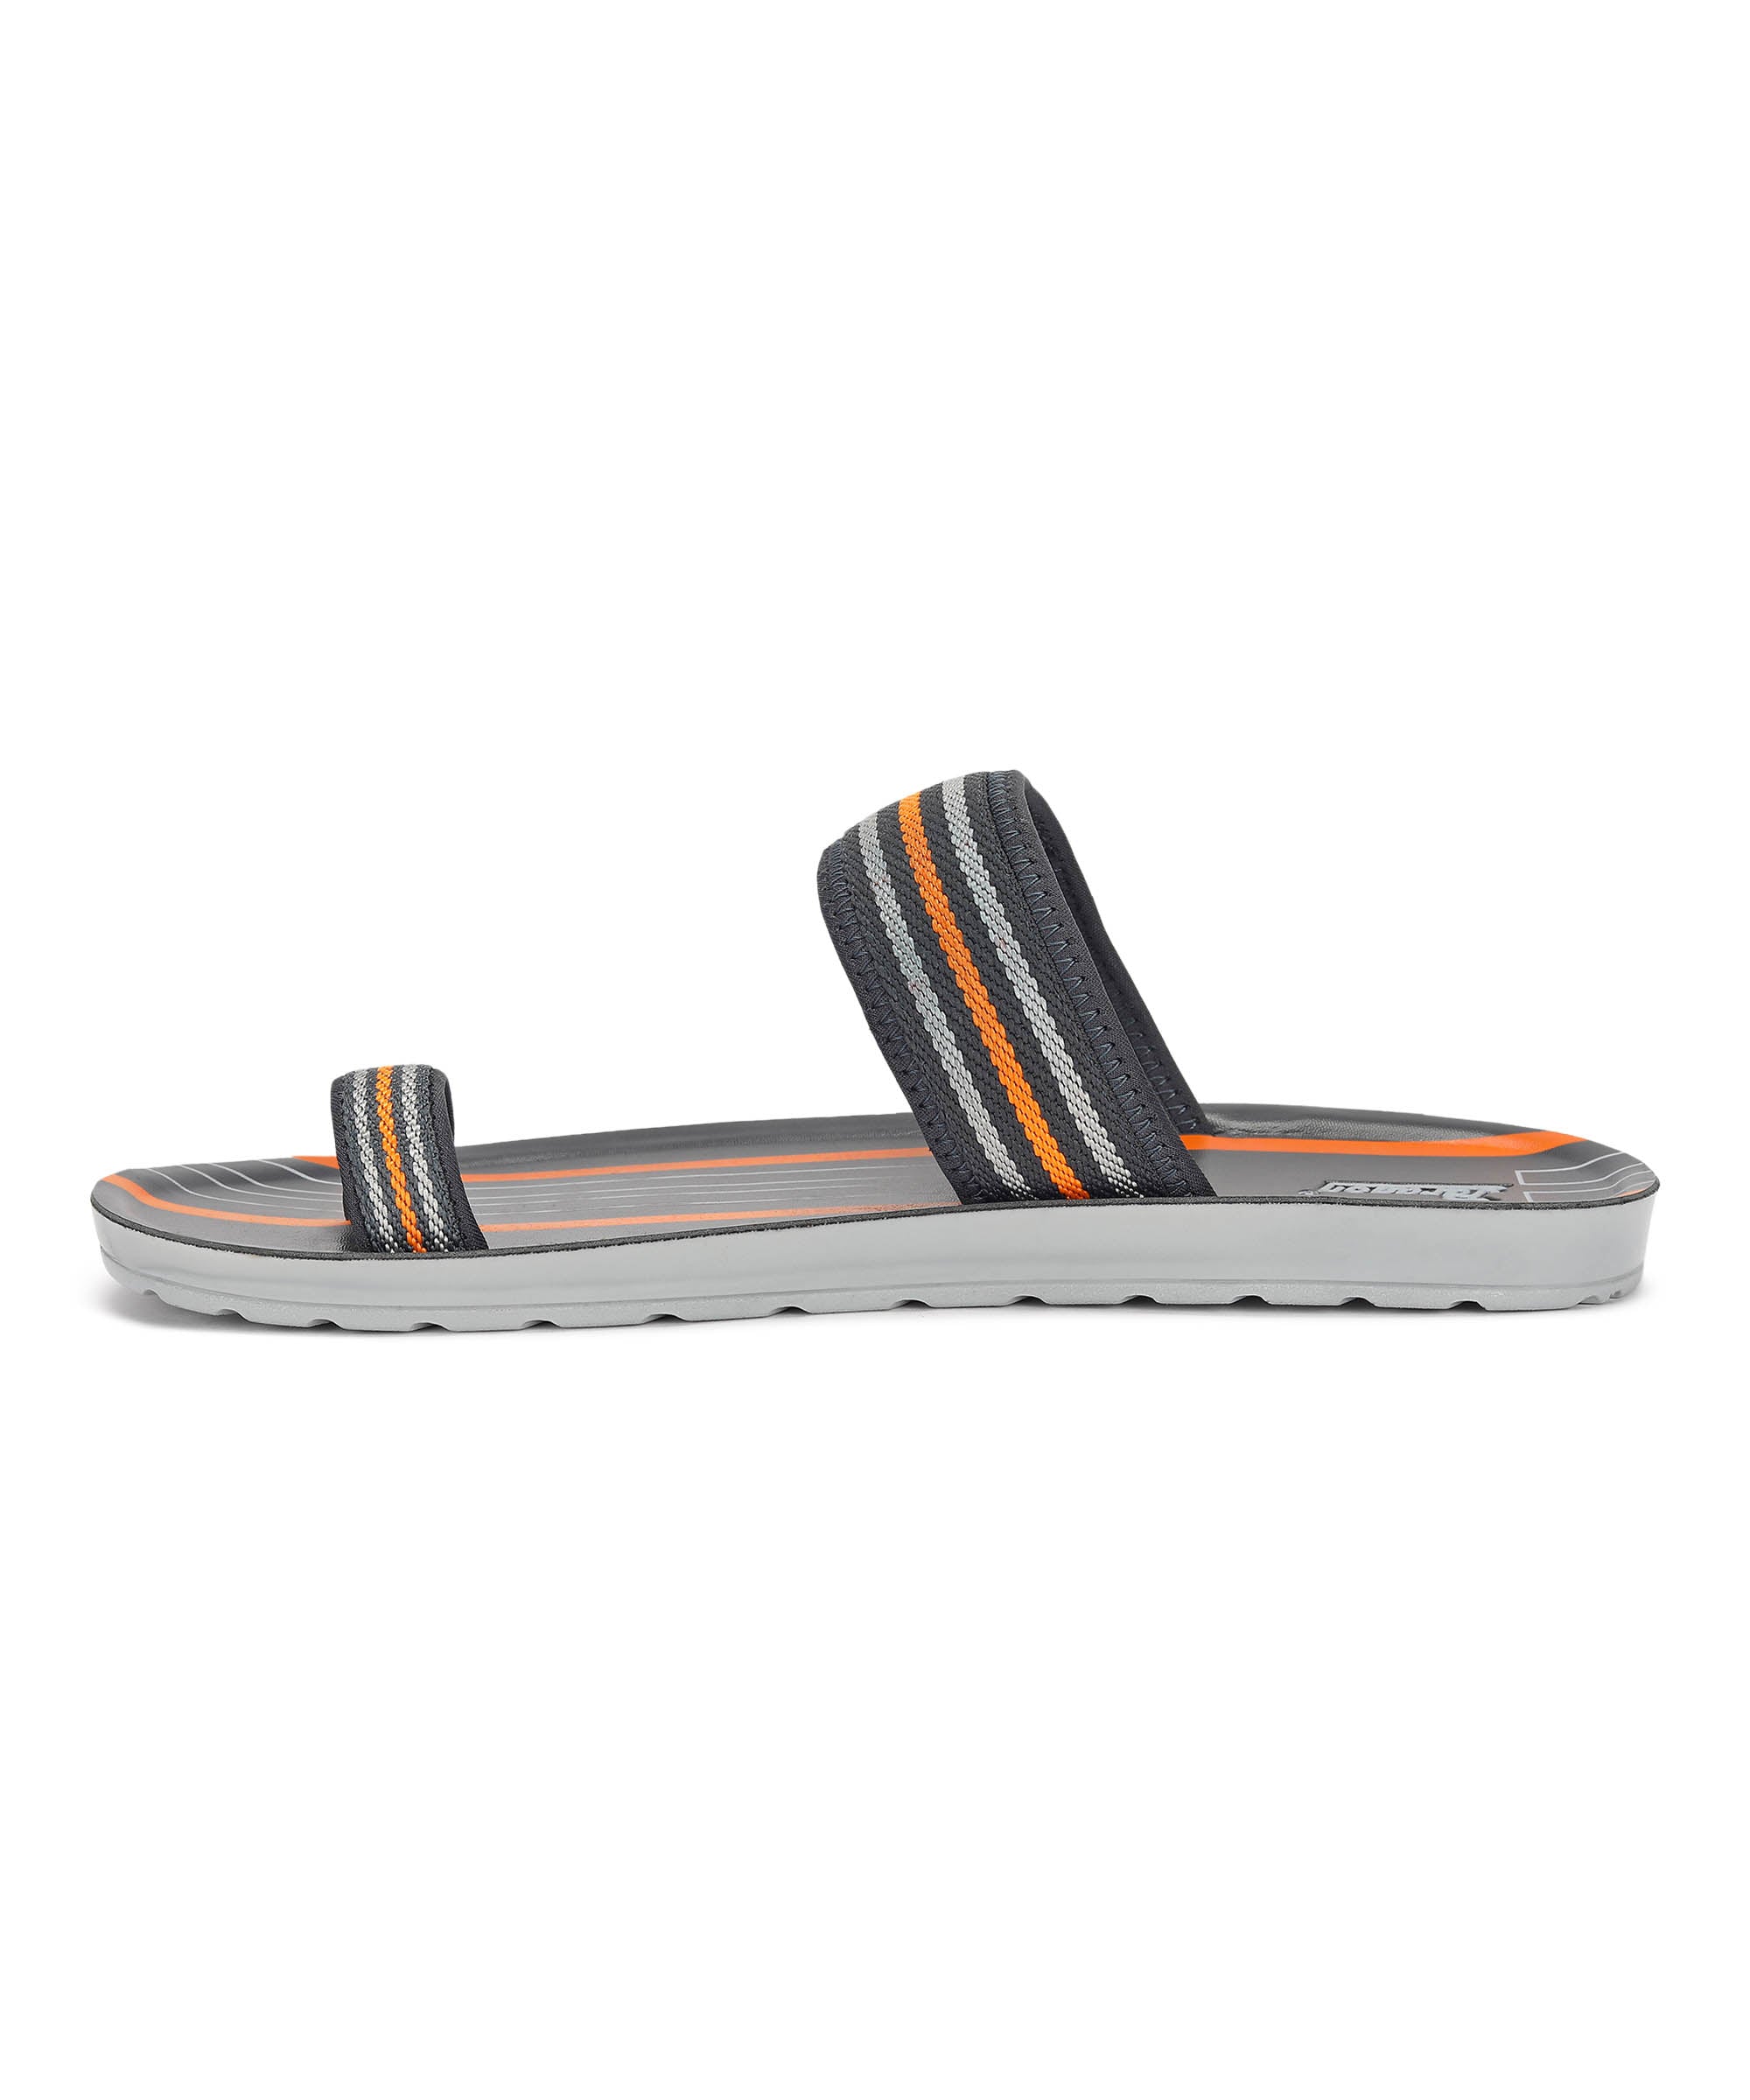 Paragon PUK2226G Men Stylish Lightweight Flipflops | Comfortable with Anti skid soles | Casual &amp; Trendy Slippers | Indoor &amp; Outdoor